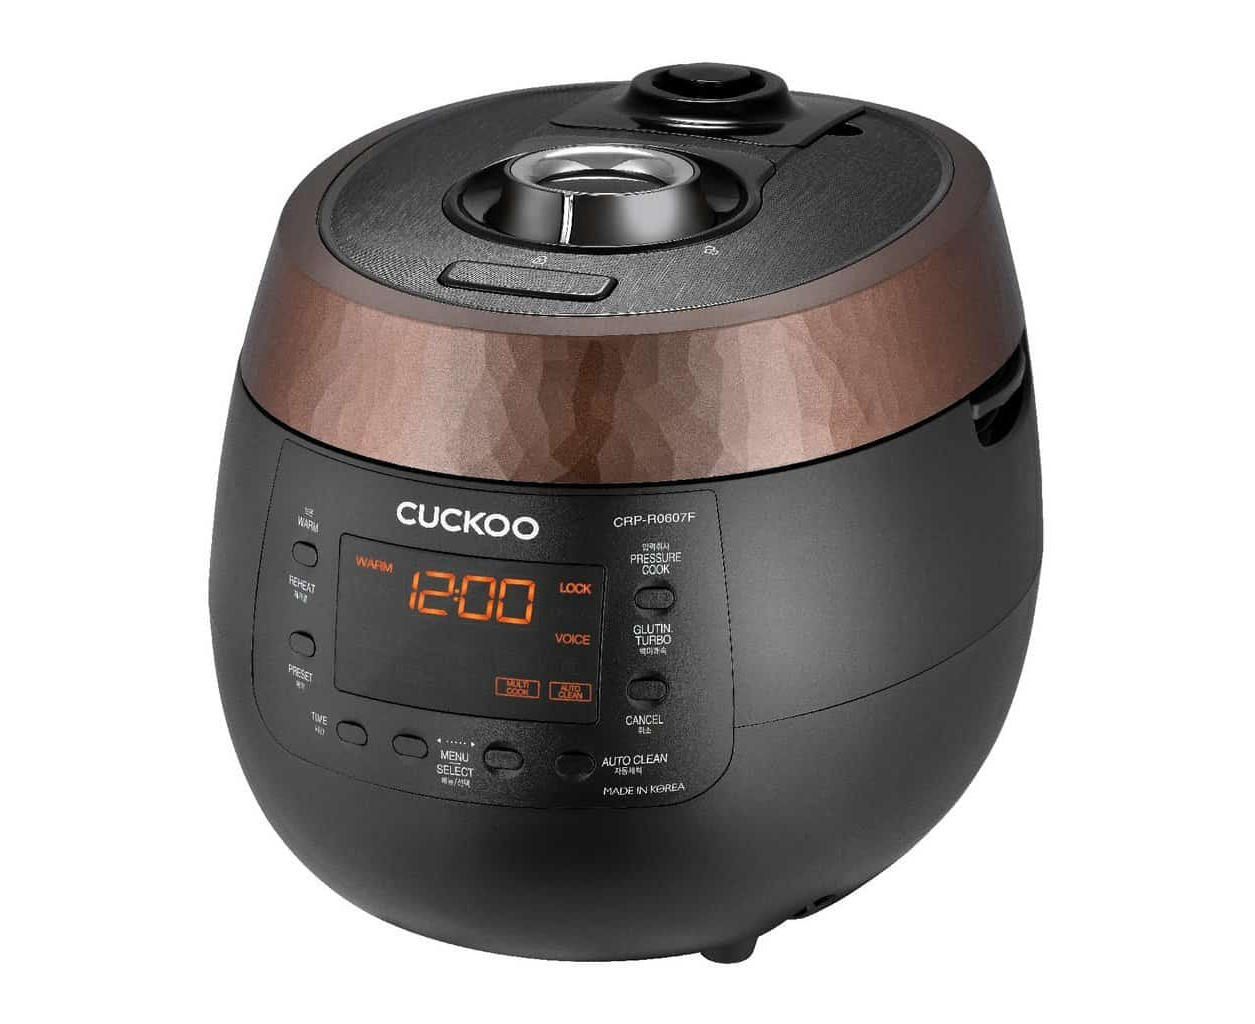 15 Incredible Cuckoo Pressure Rice Cooker For 2023